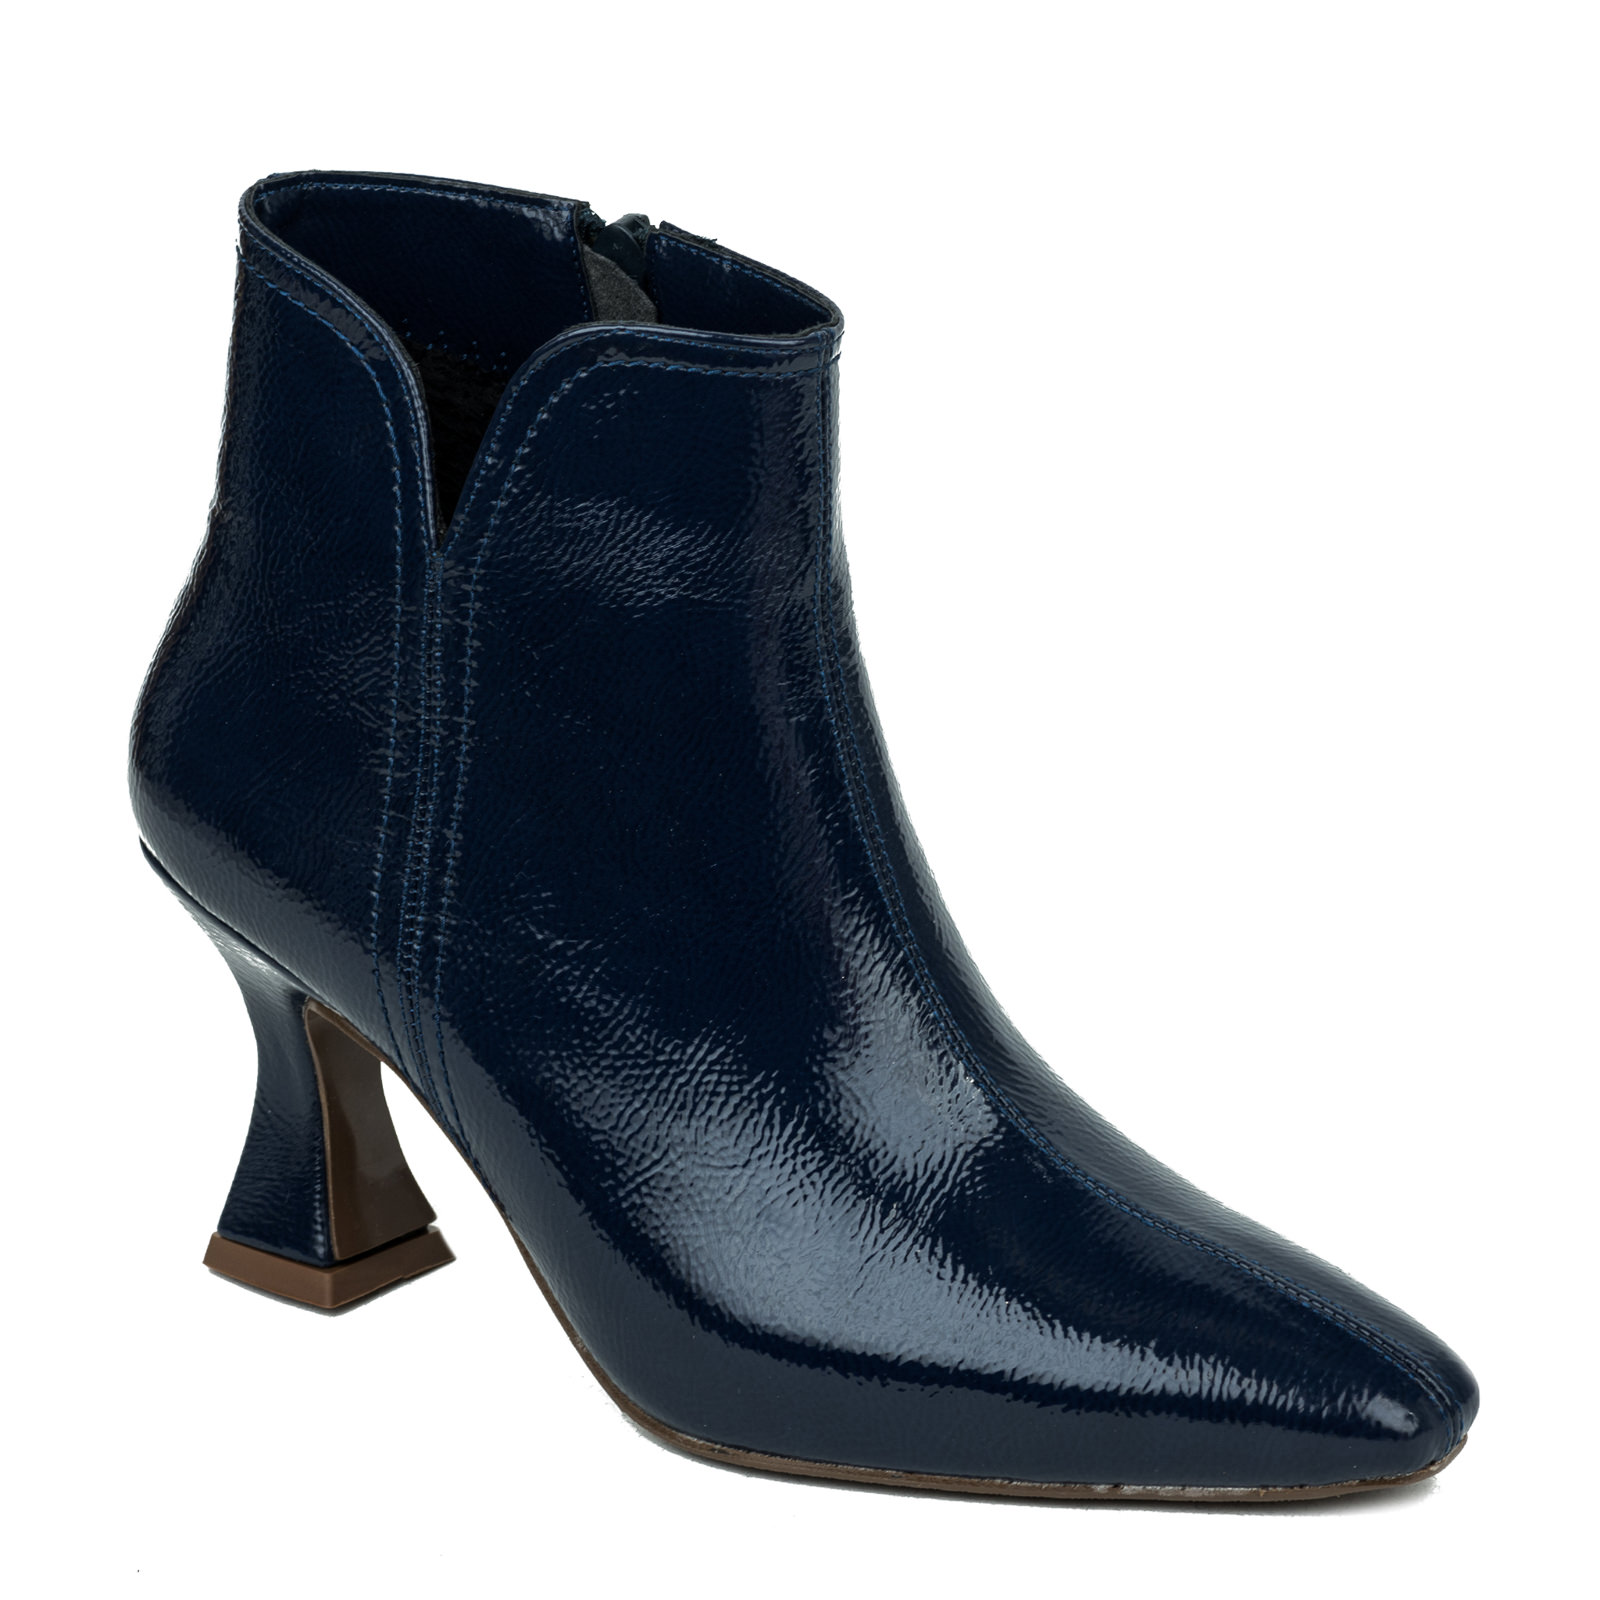 Women ankle boots B165 - NAVY